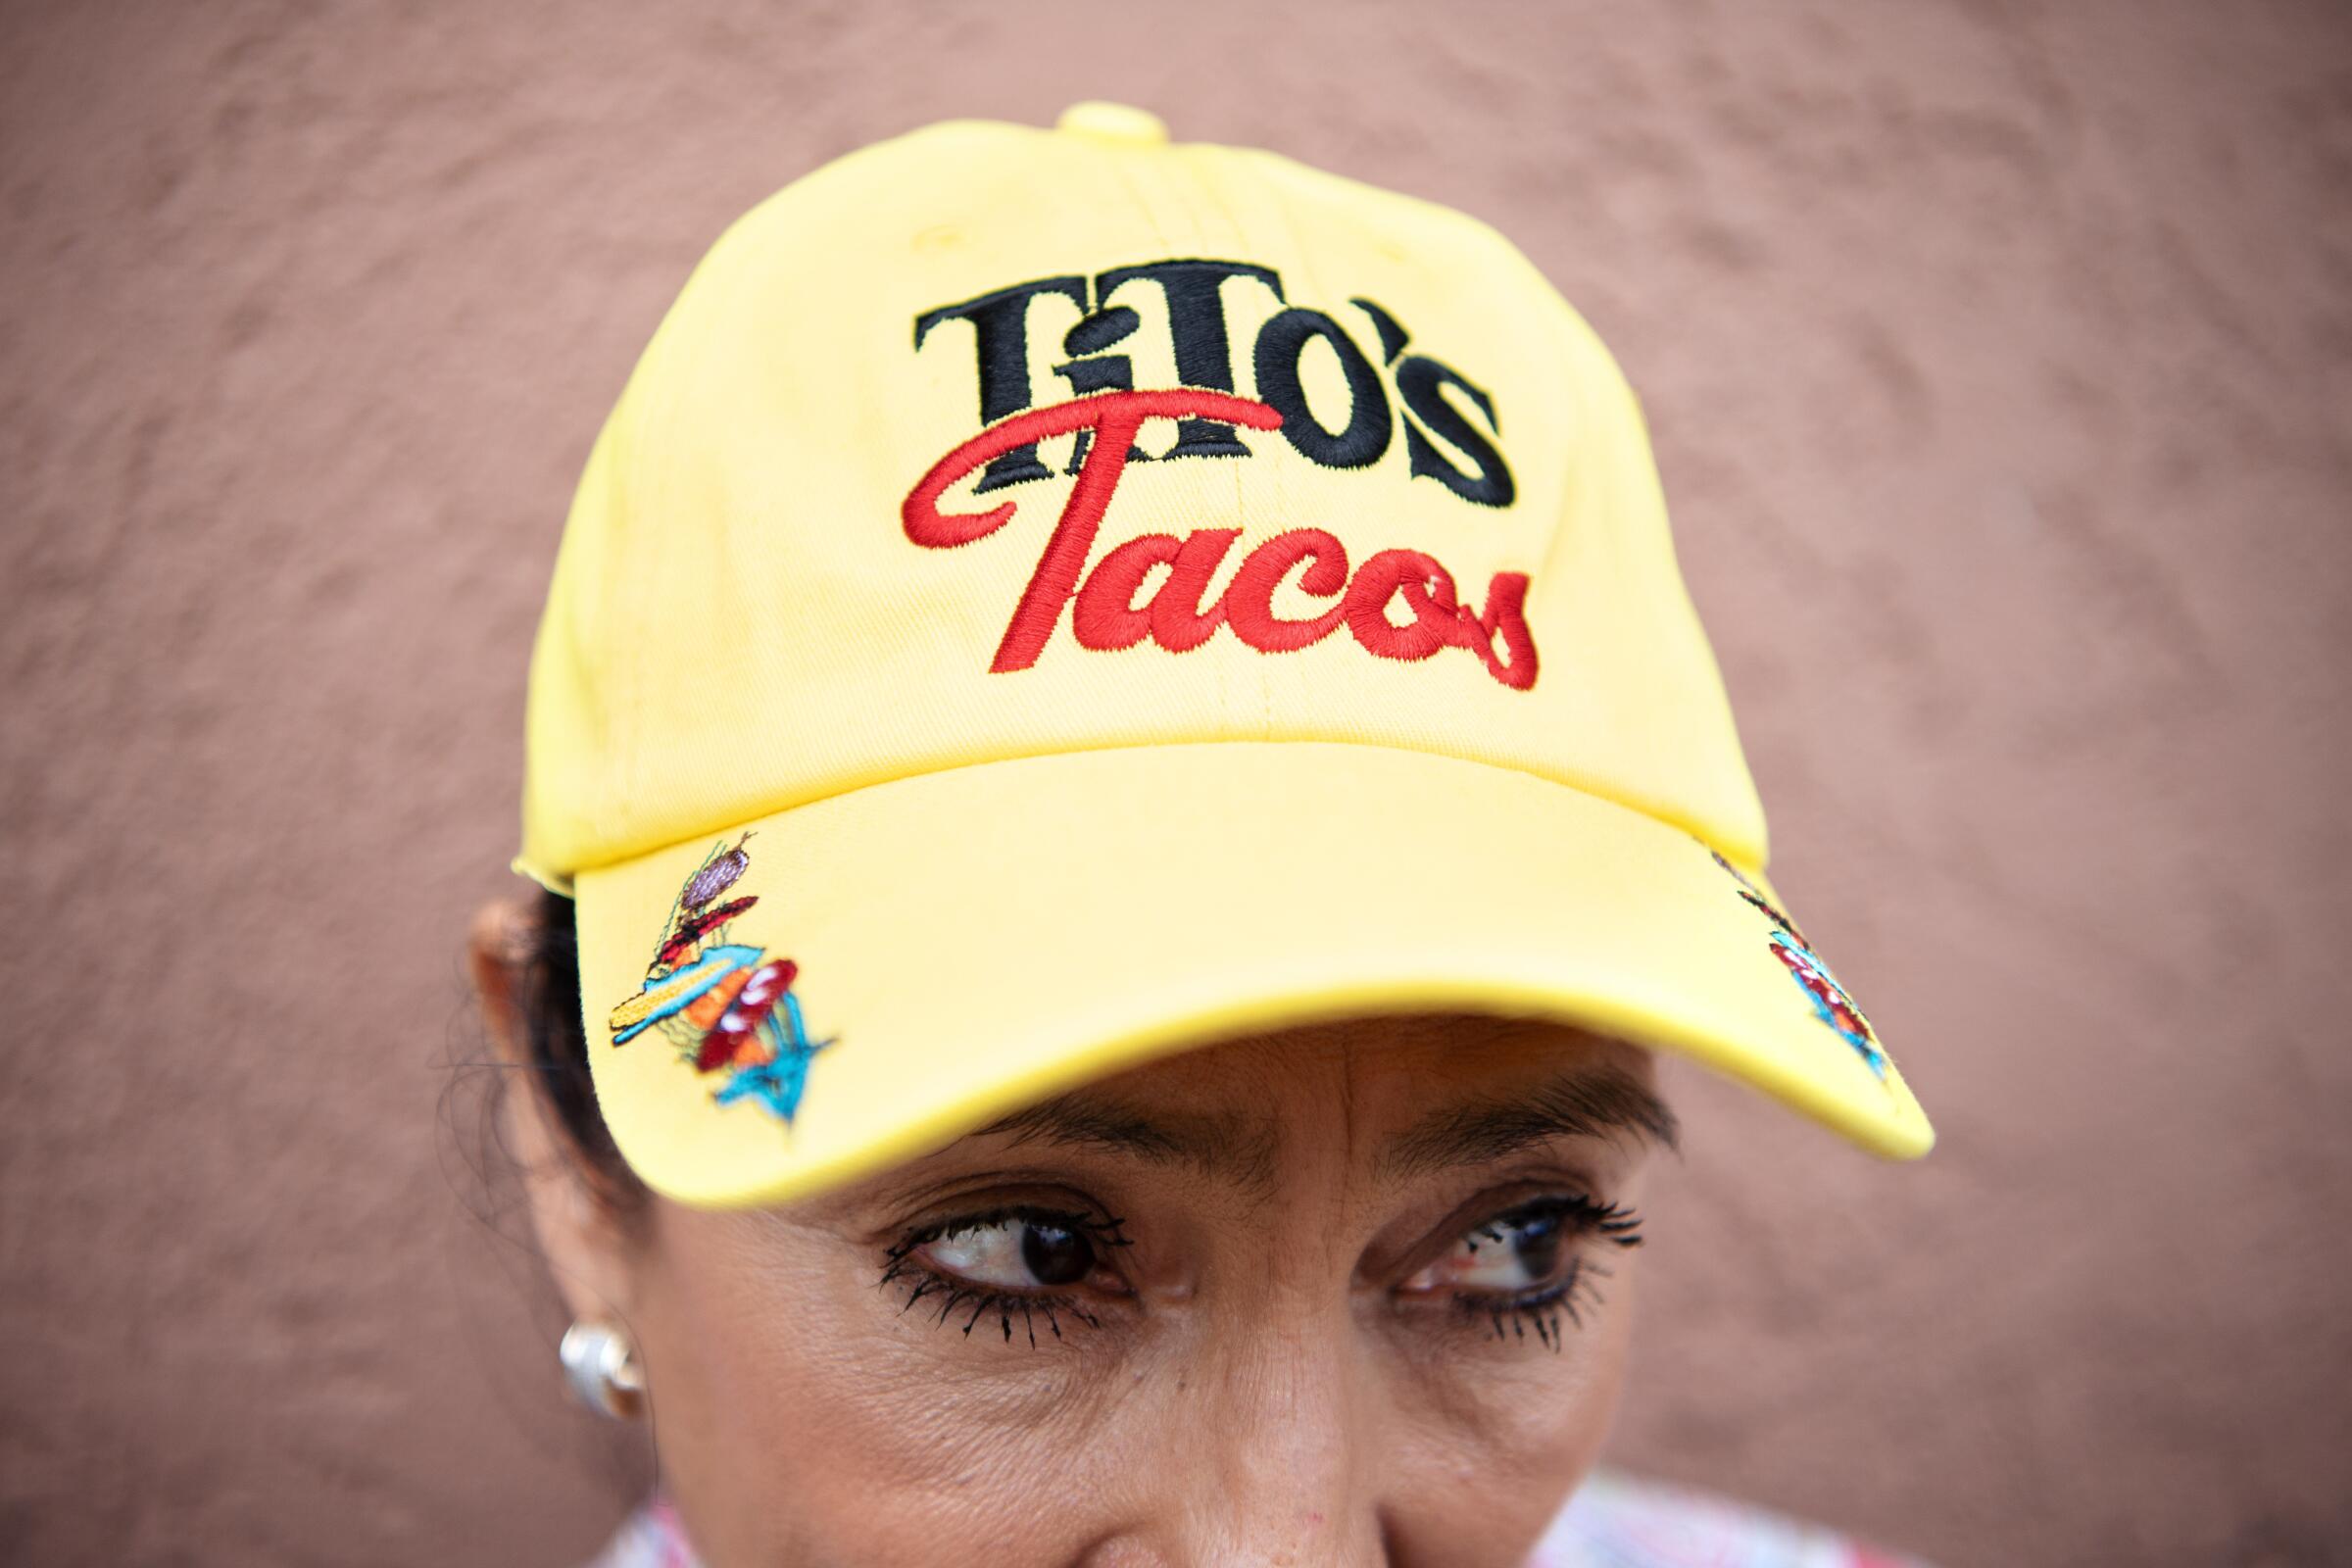 Los Angeles Times photographer Mariah Tauger paid a visit to Tito's Tacos in Culver City. Established in 1959, it's become a staple for many in Los Angeles and has served multiple generations of loyal customers.